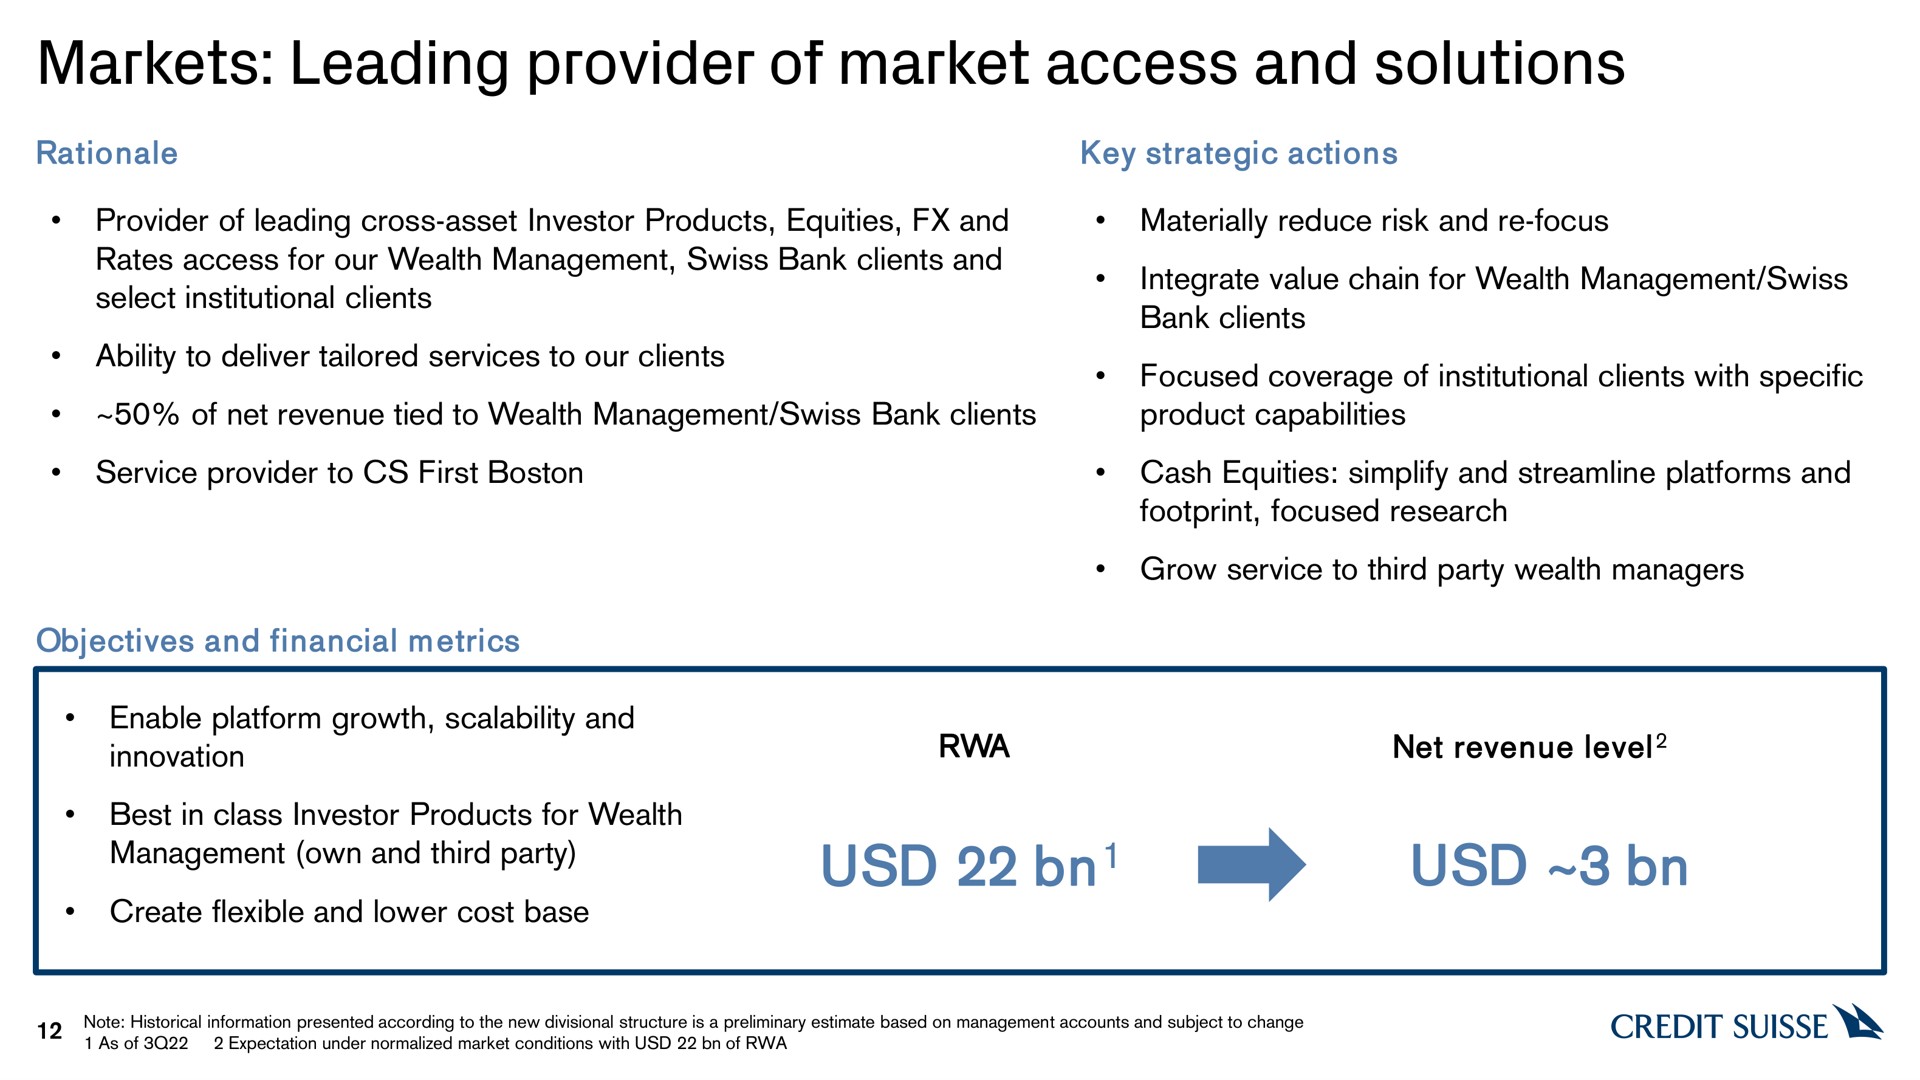 markets leading provider of market access and solutions | Credit Suisse